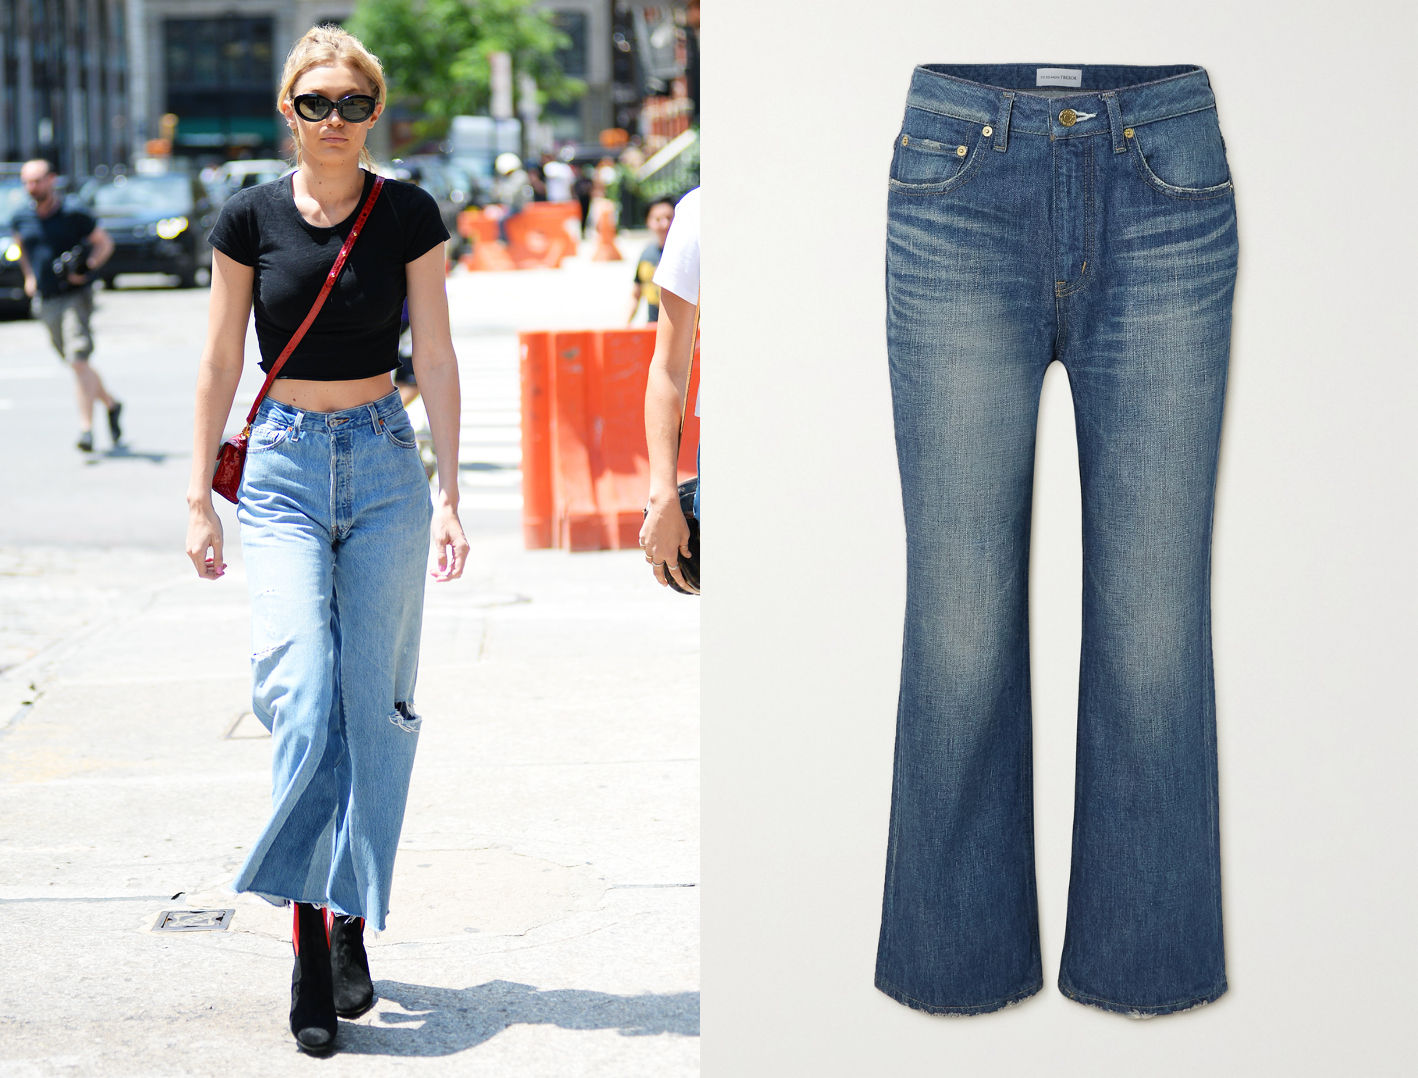 6 Stylish Ways to Wear Flare Jeans in 2021